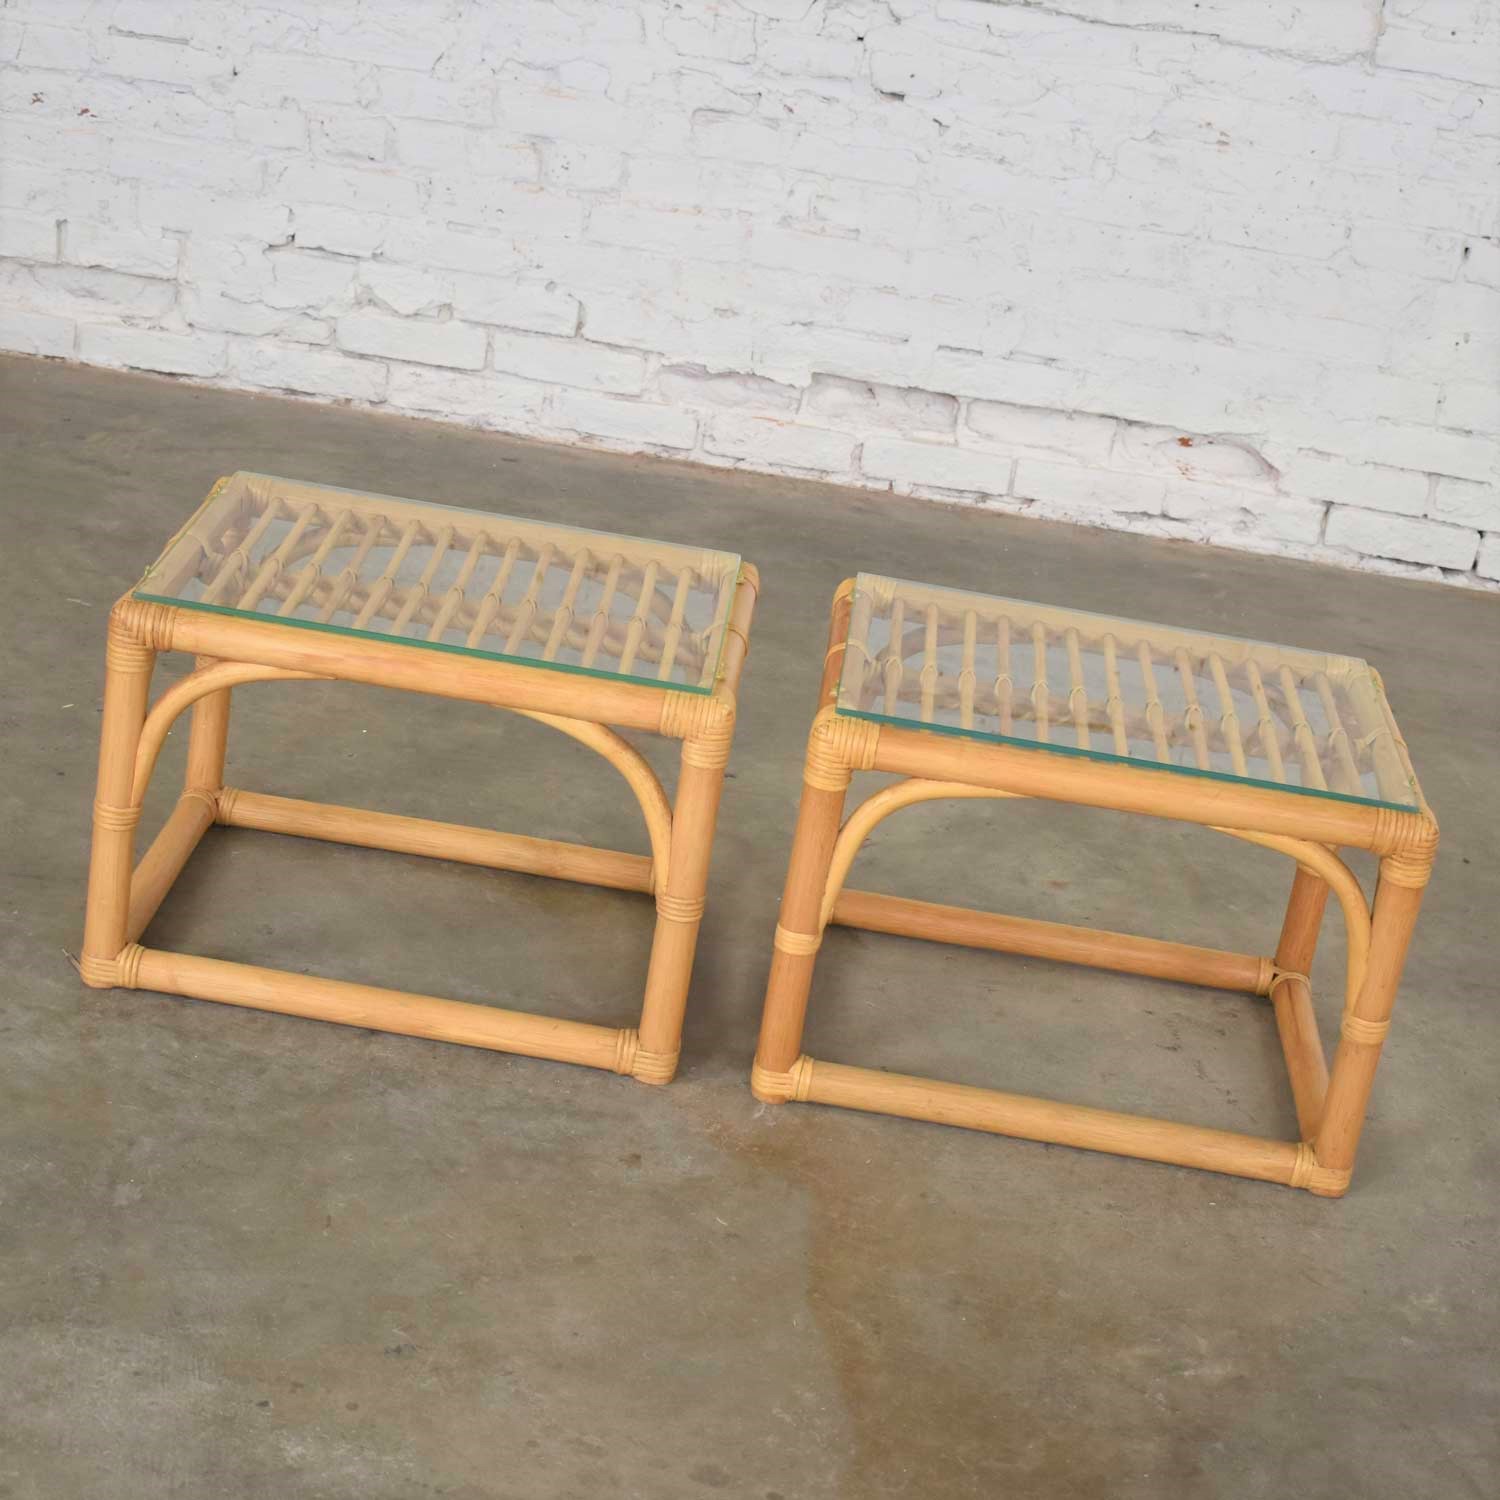 Vintage Modern Pair of Rattan Rectangular Side Tables or End Tables with Glass Top